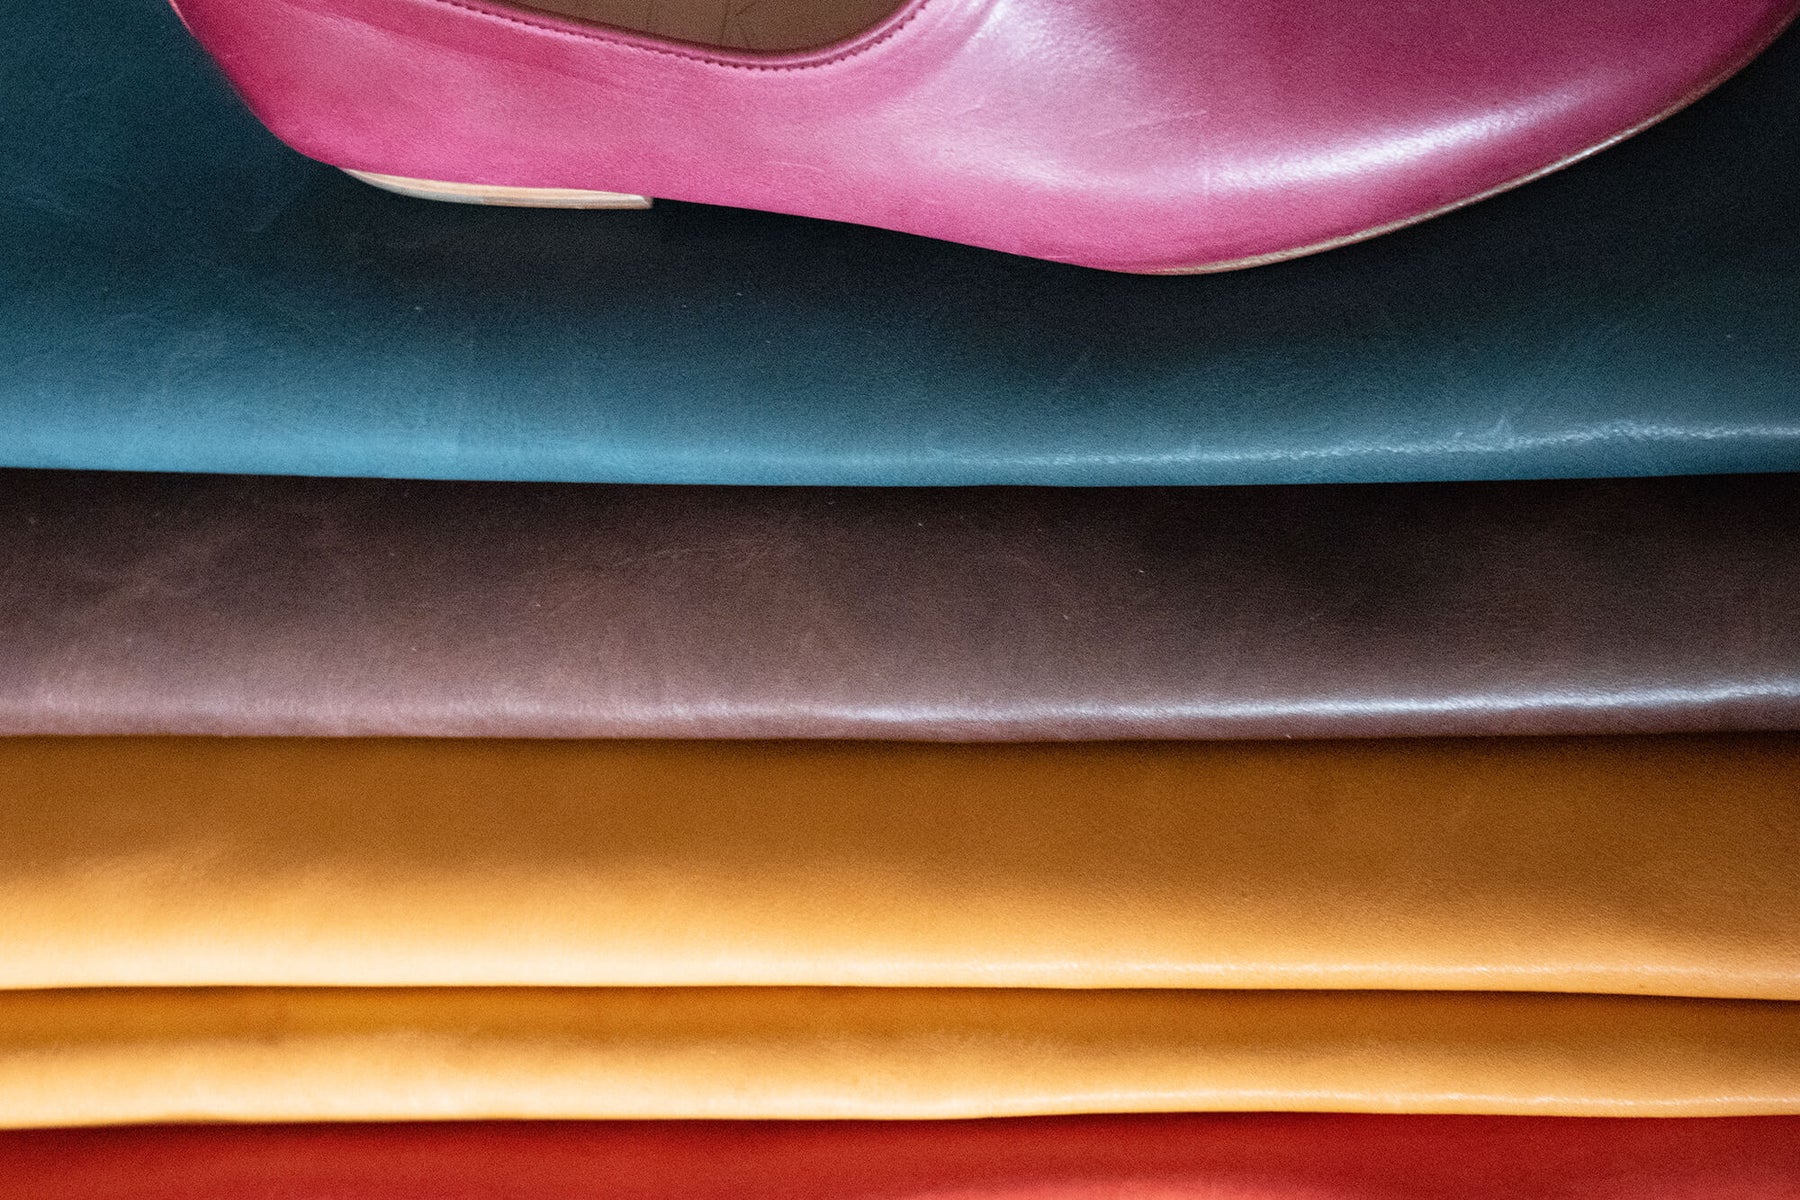 vegetable-tanned italian leather in different colors